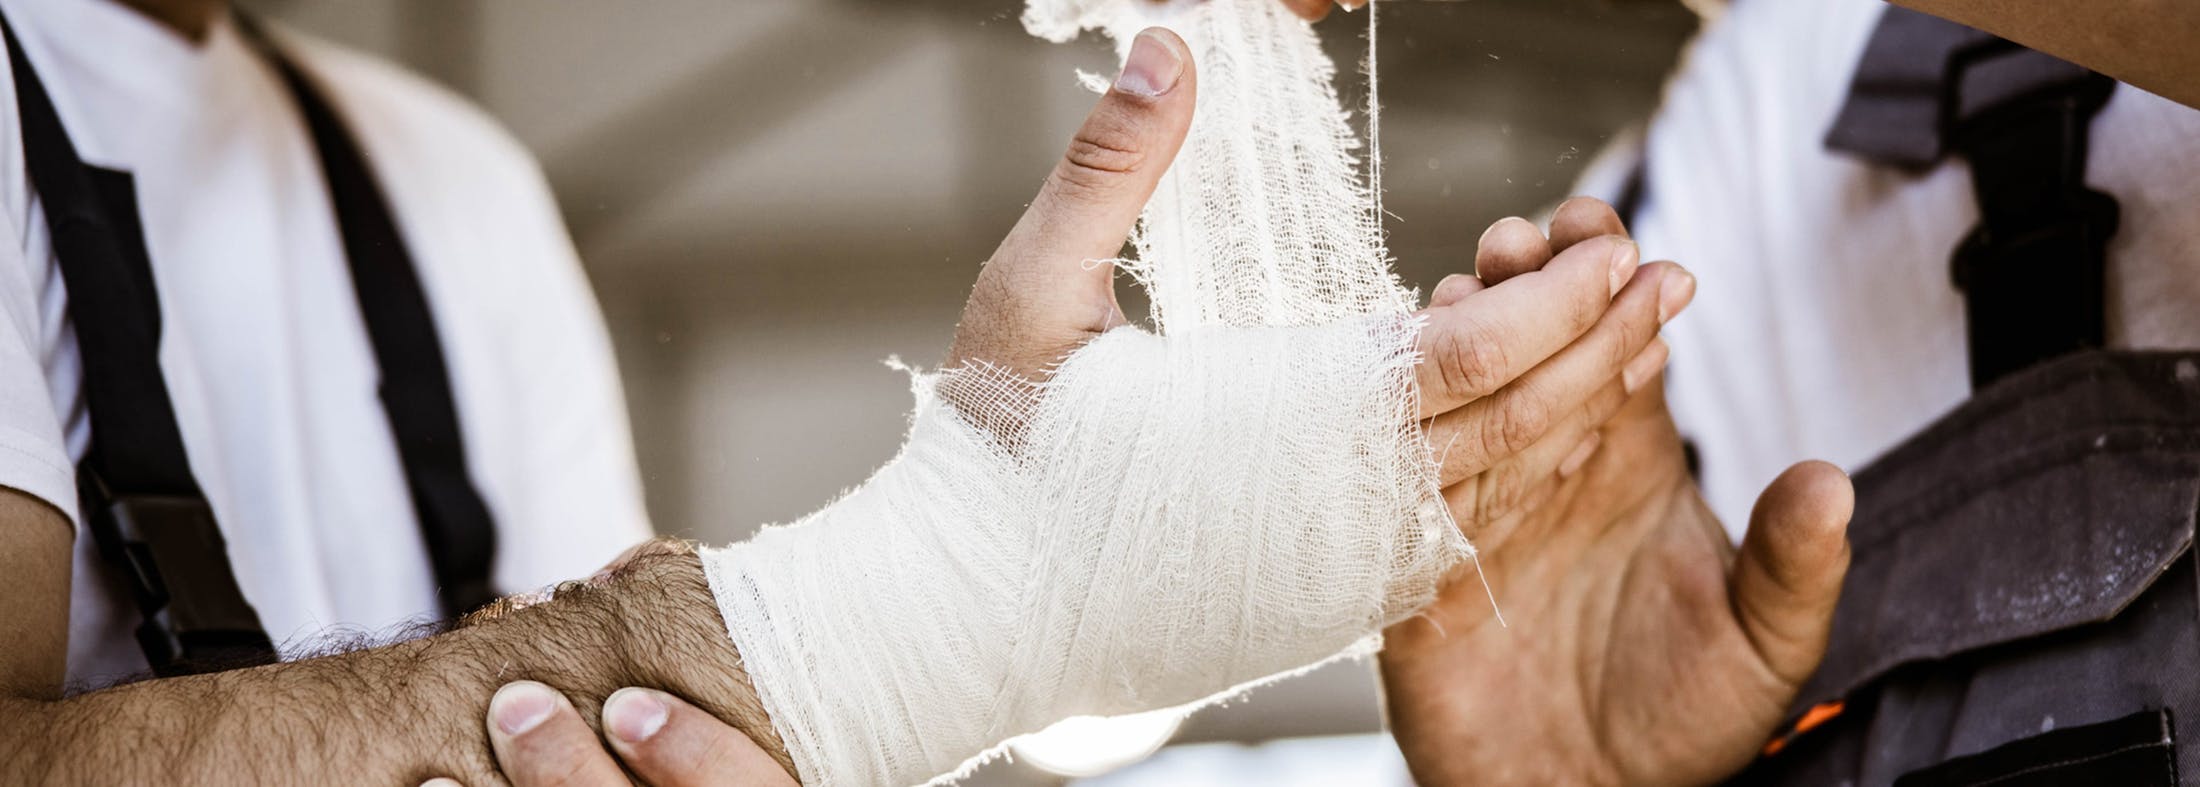 Person getting their hand wrapped in gauze